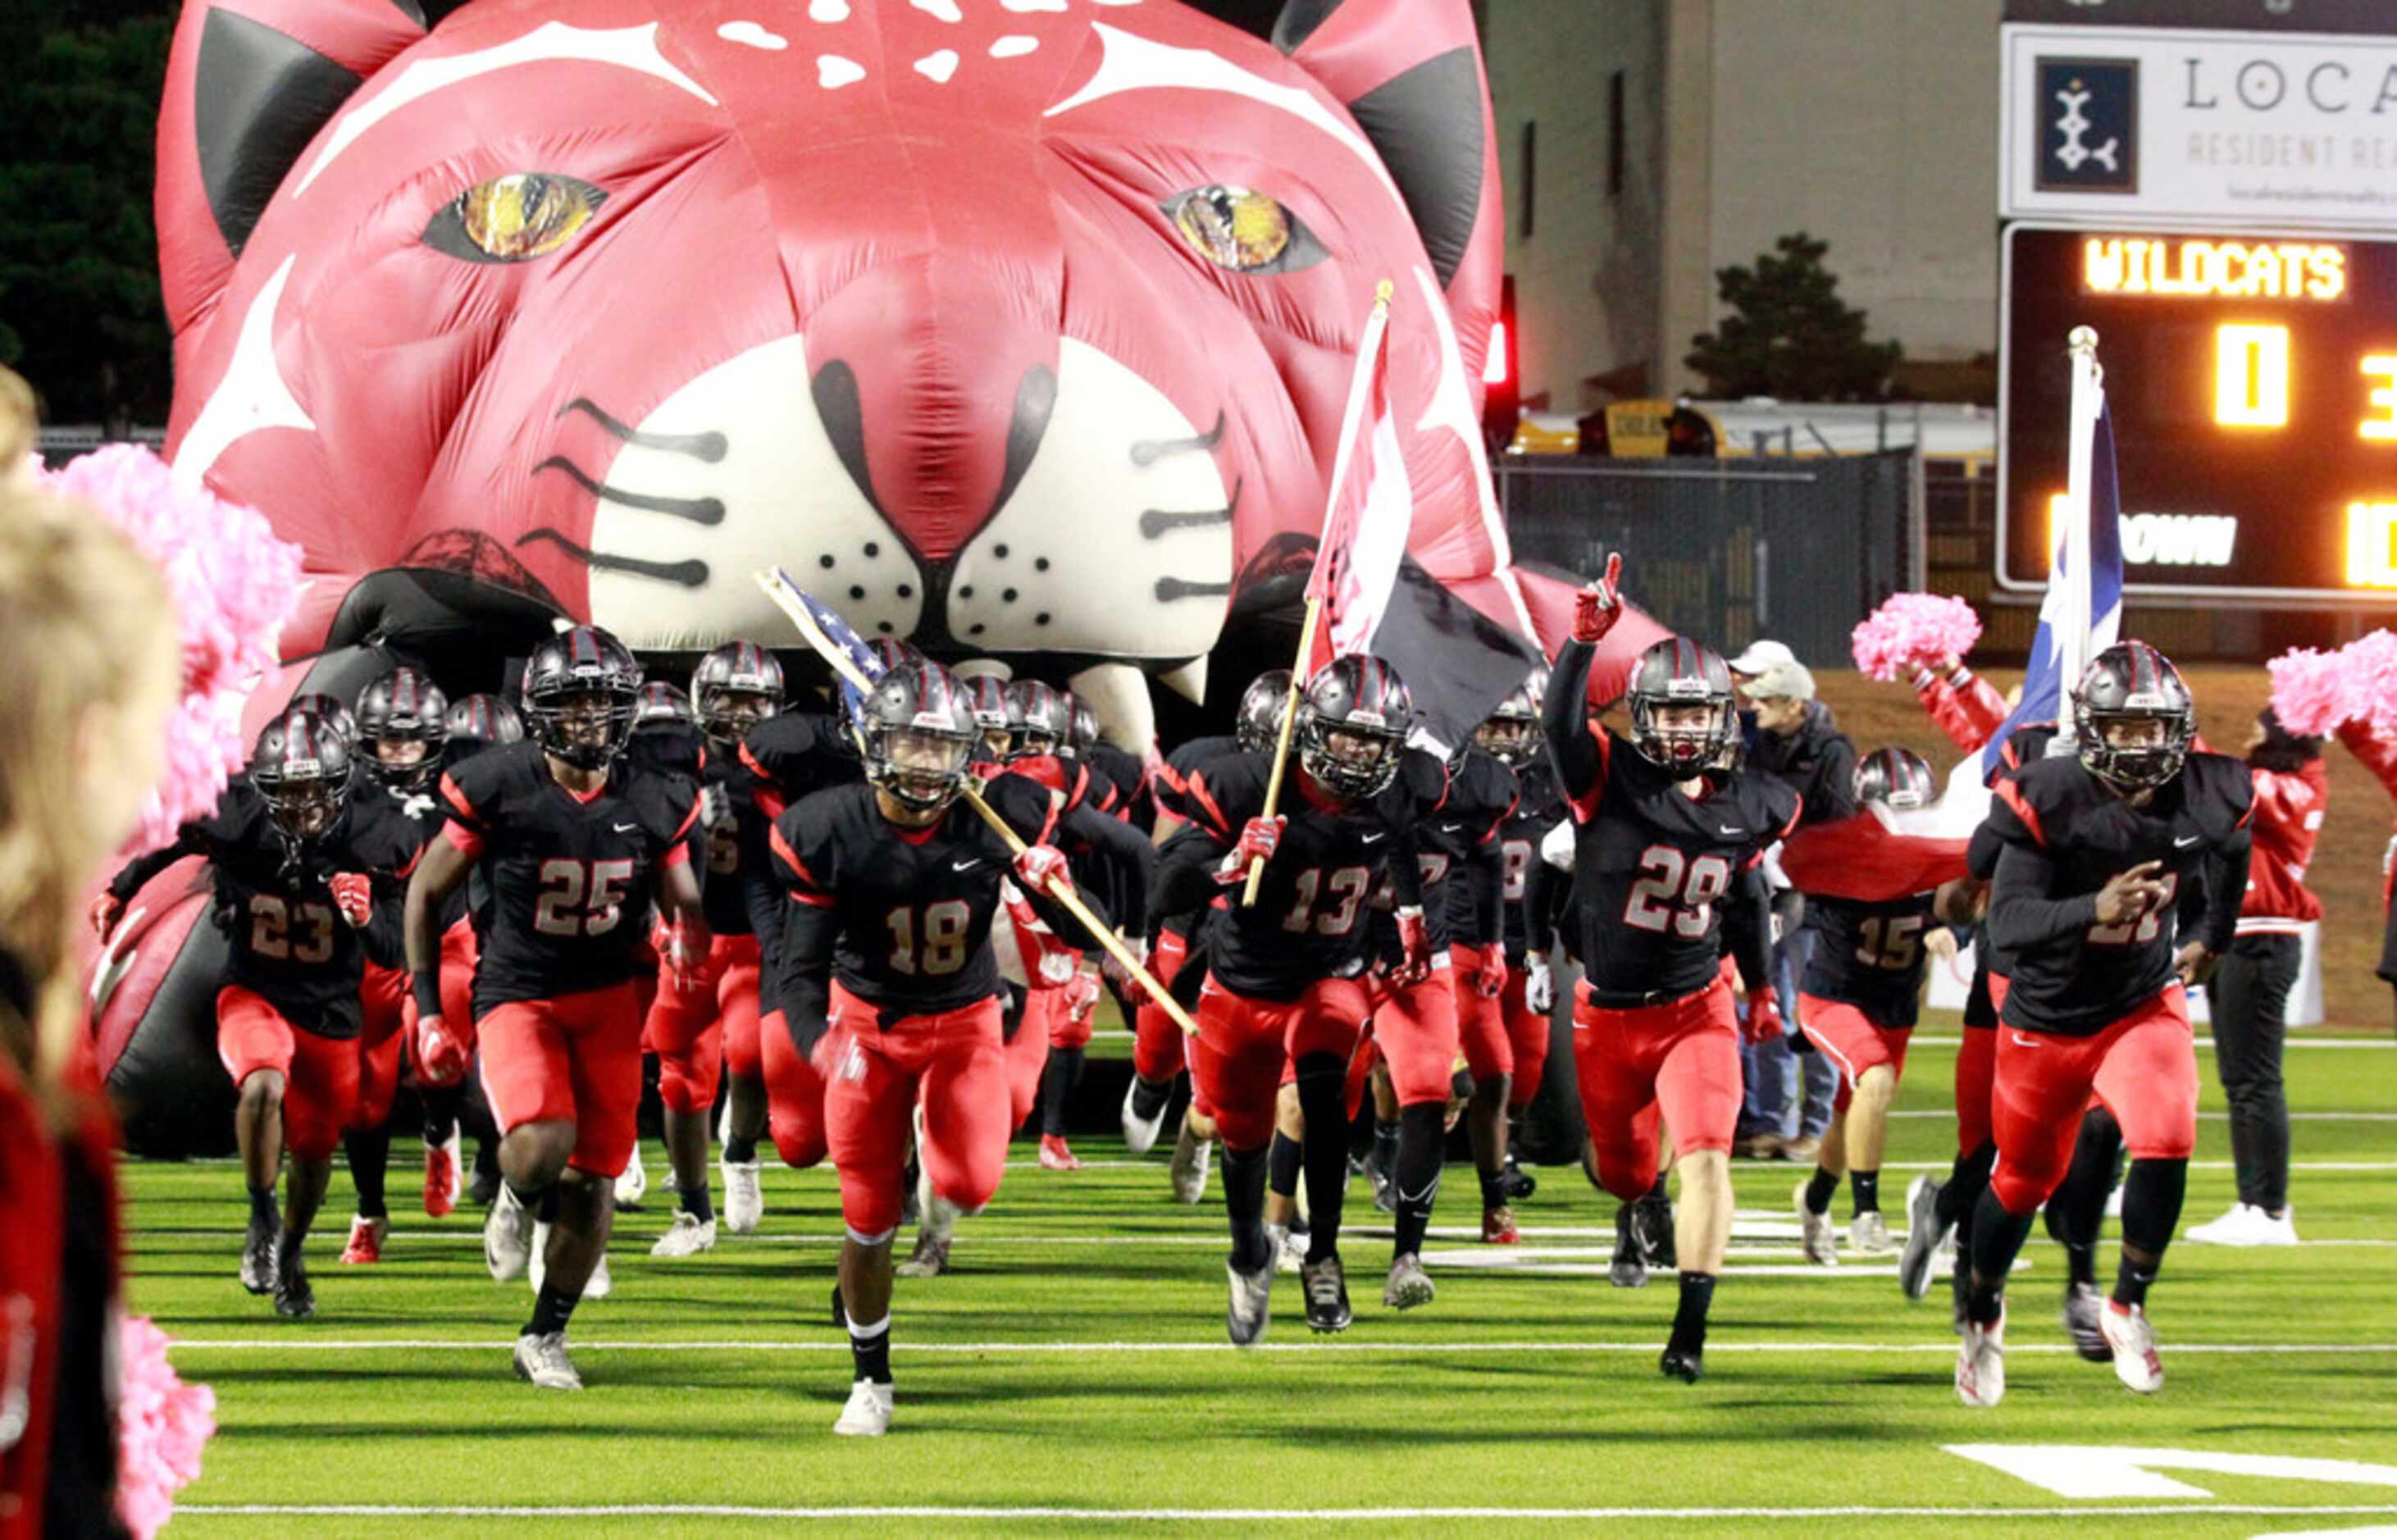 The Lake Highlands team takes the field before the start of their high school football game...